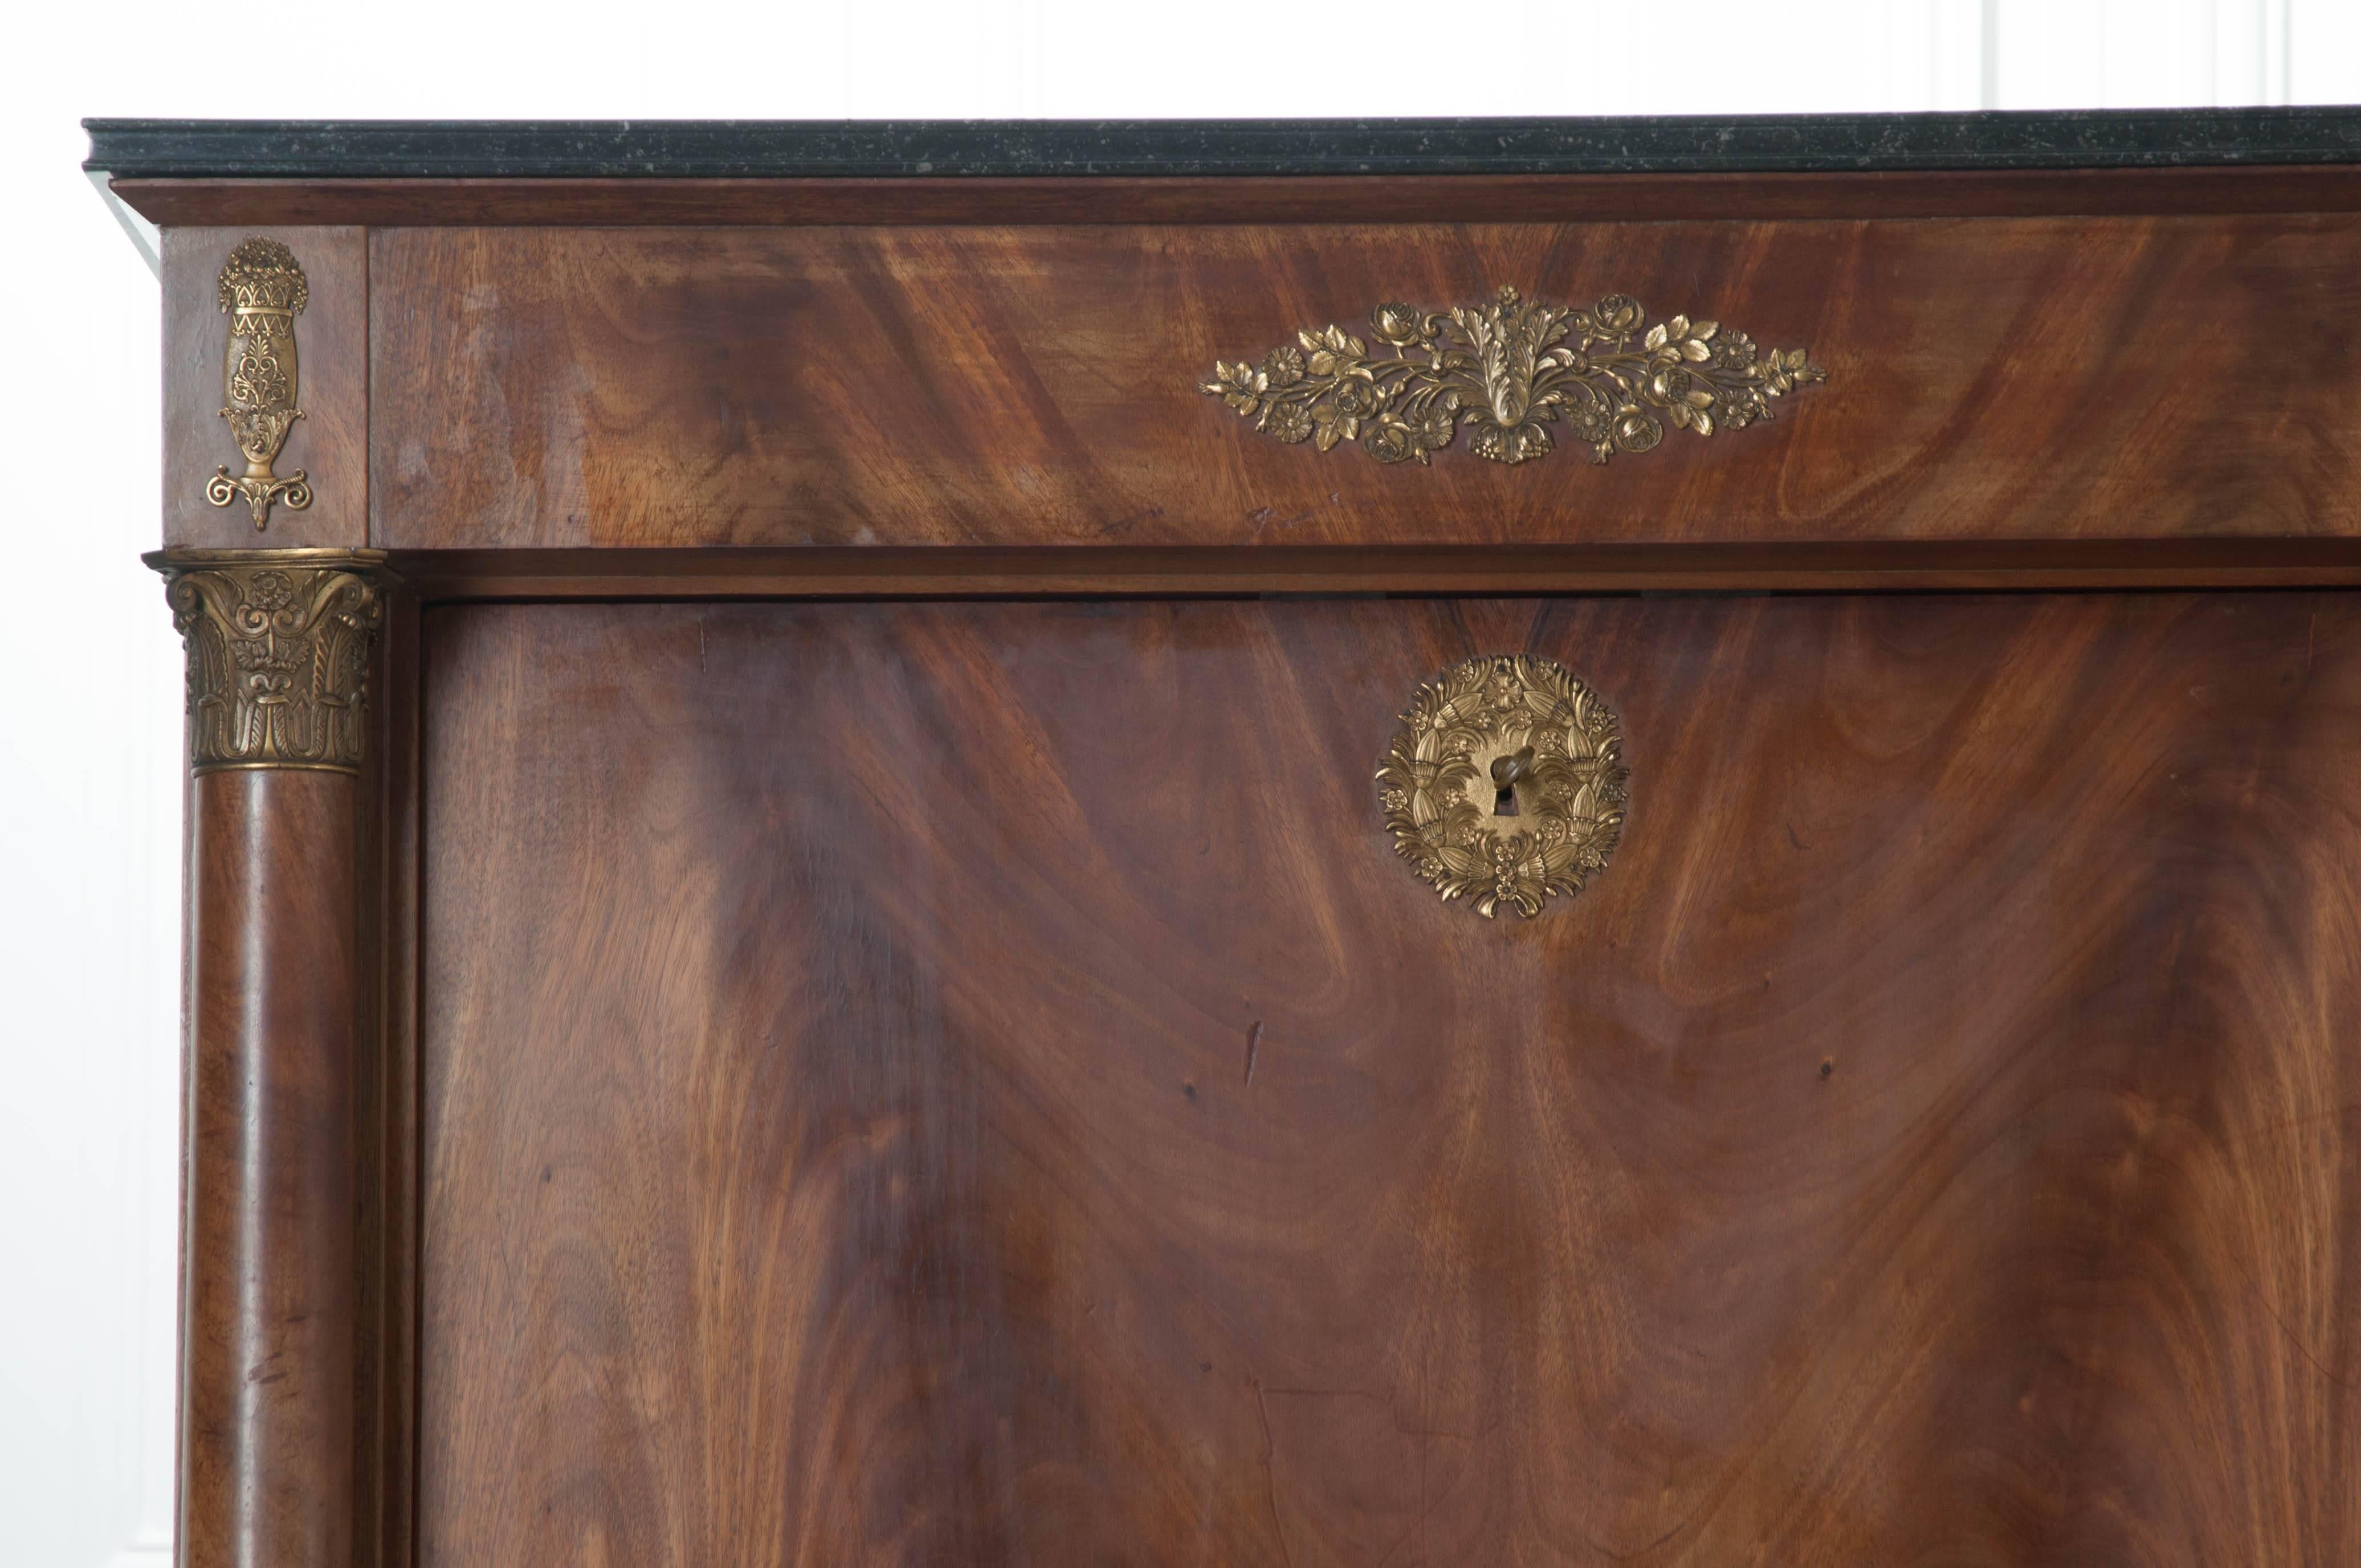 A stunning 19th century Empire secretary, in mahogany, from France. The desk has a black, fossil marble top with finished edge, that is in spectacular antique condition. The front of the desk folds forward to reveal the piece's work area. This space